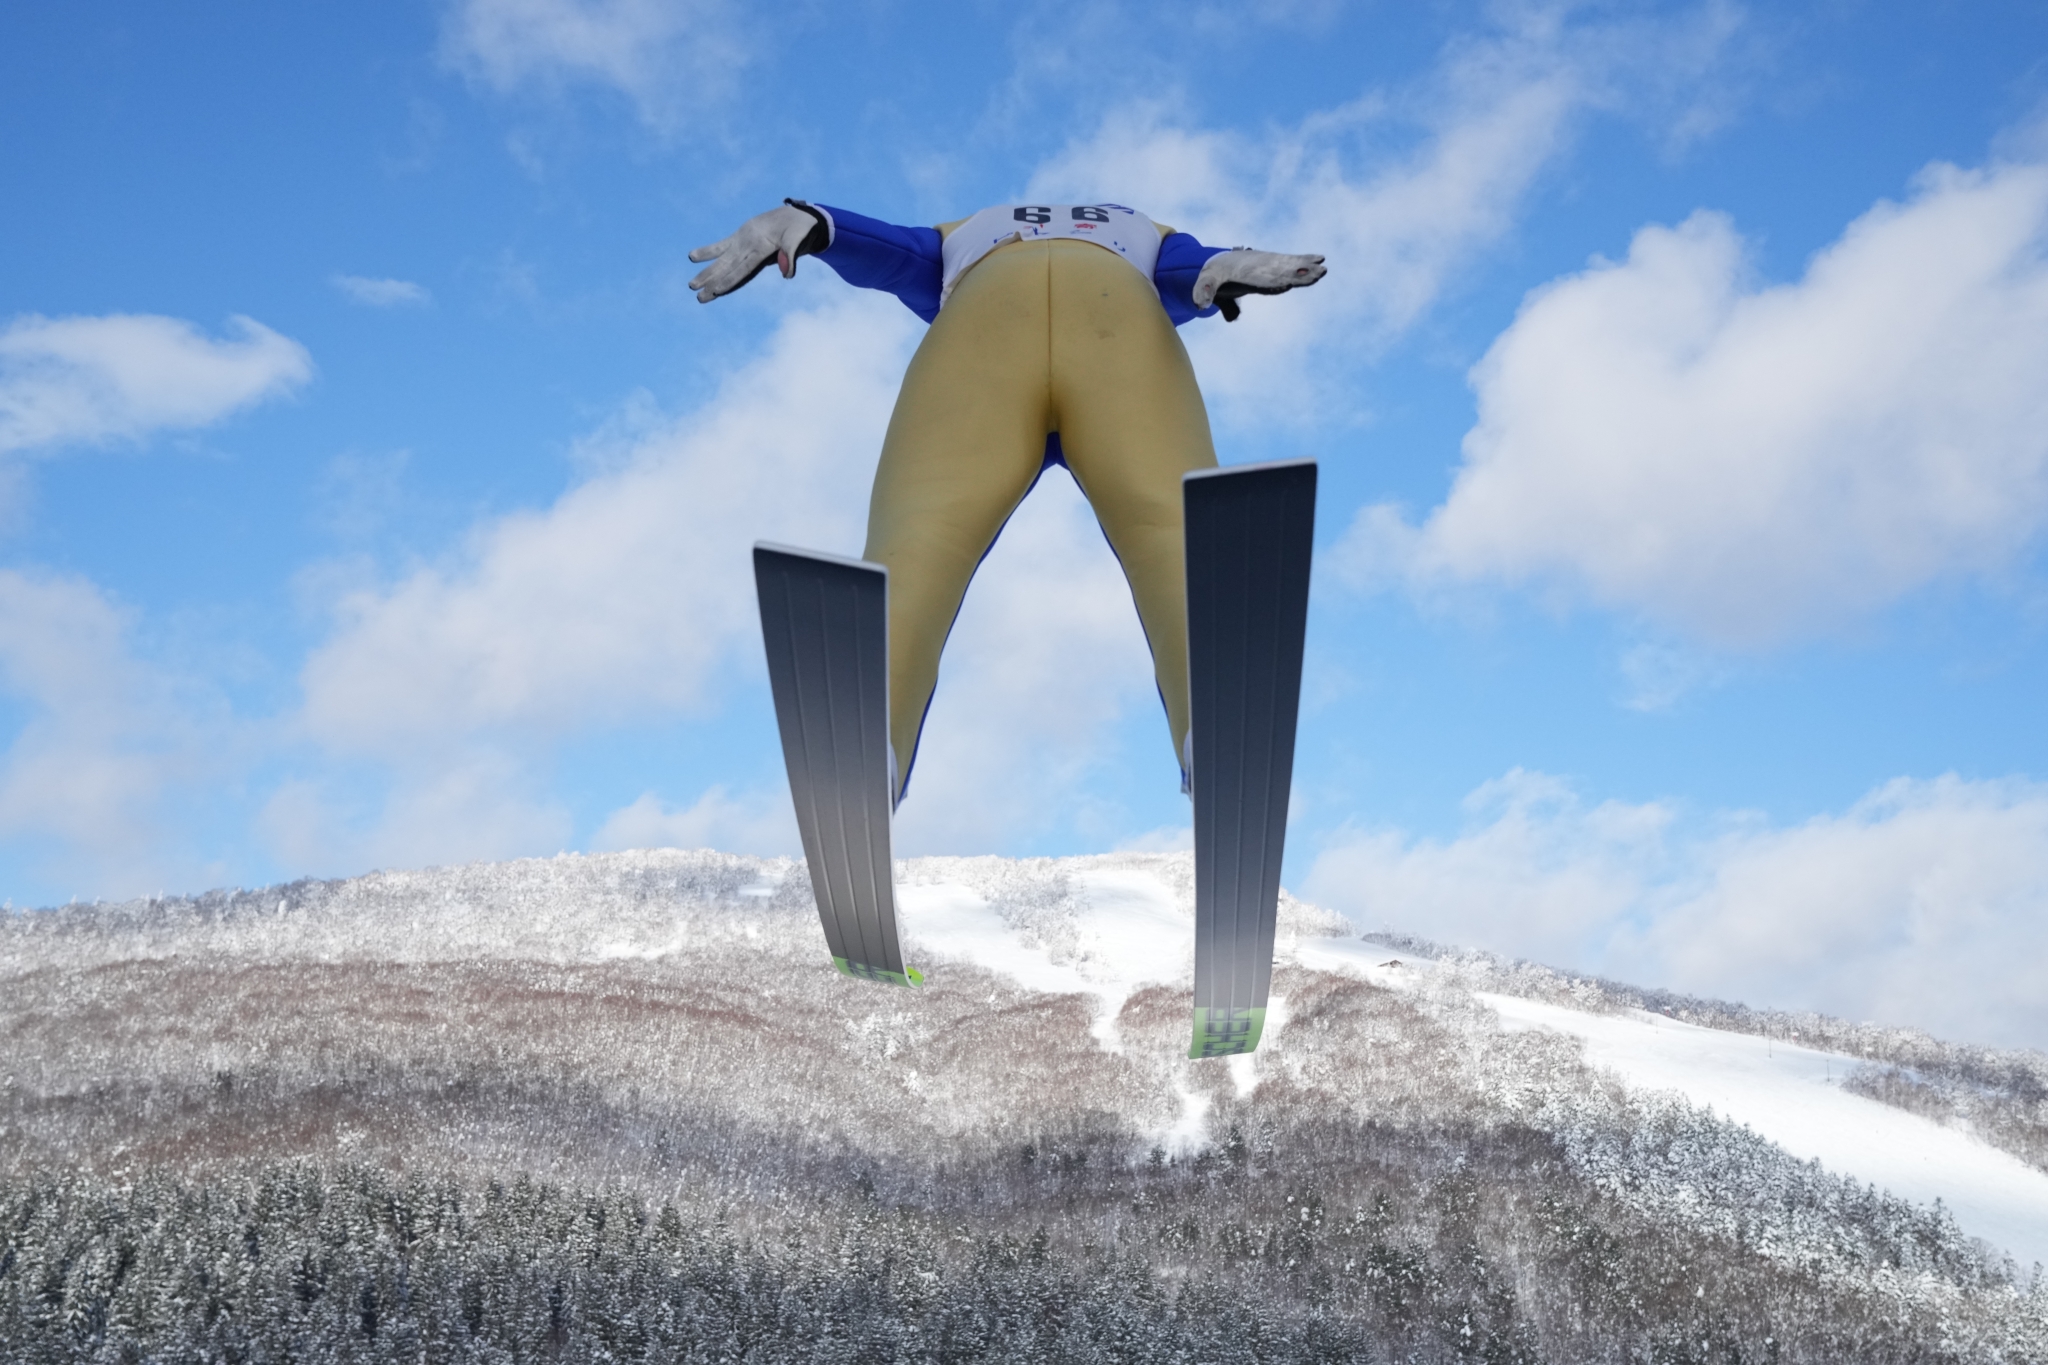 The back of a skier mid jump with snowy mountains in background